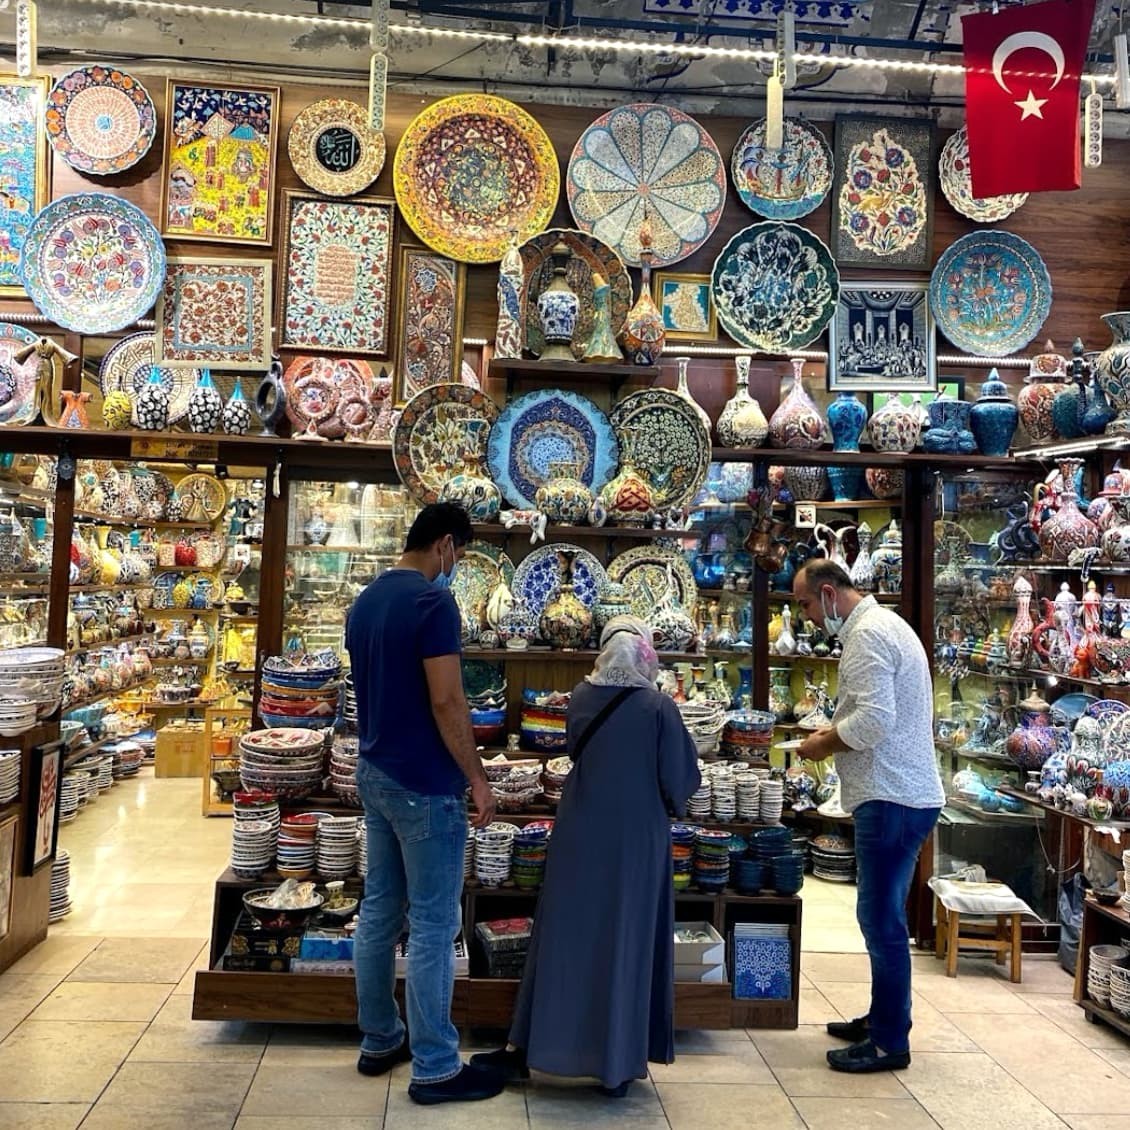 Shoppers at Istanbul's Grand Bazaar